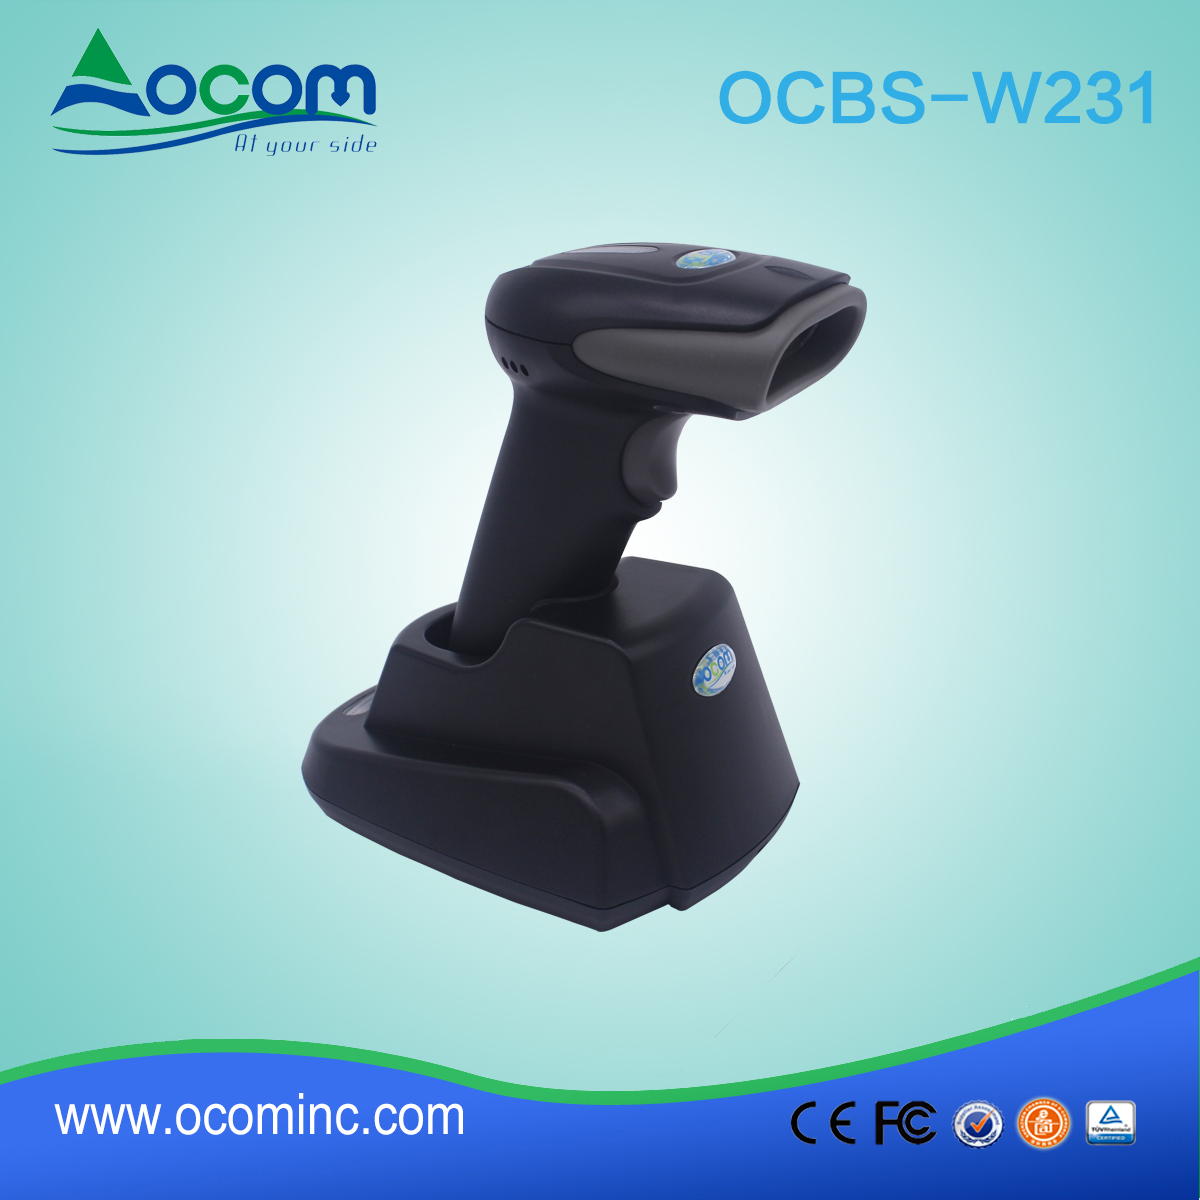 433MHz Wireless Barcode Scanner with USB Cradle Receiver Charging Base